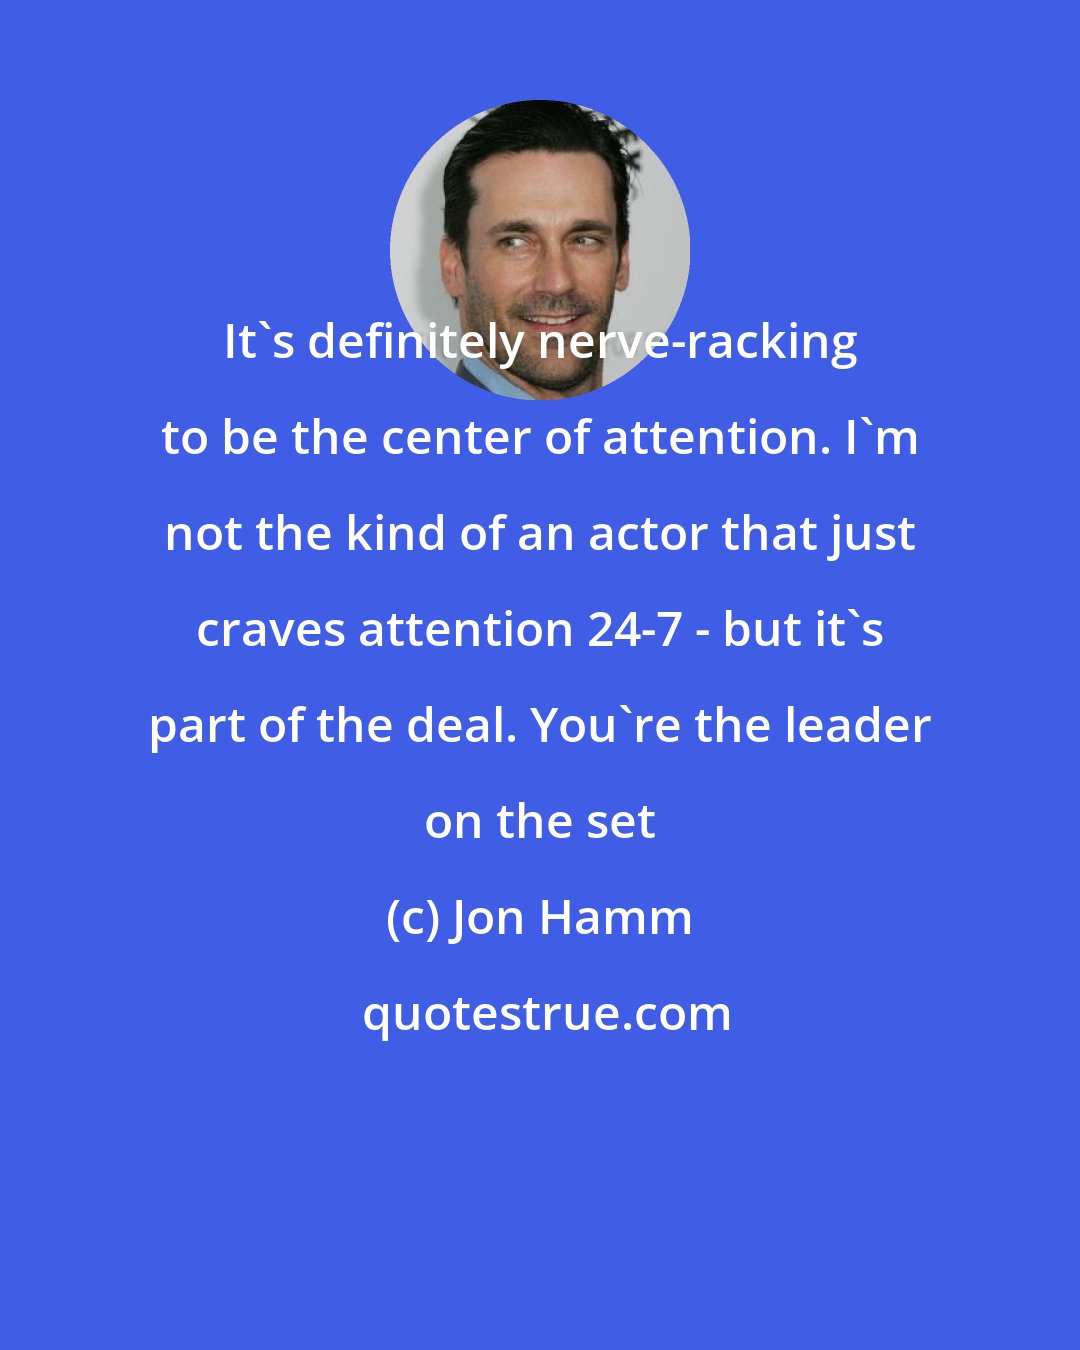 Jon Hamm: It's definitely nerve-racking to be the center of attention. I'm not the kind of an actor that just craves attention 24-7 - but it's part of the deal. You're the leader on the set